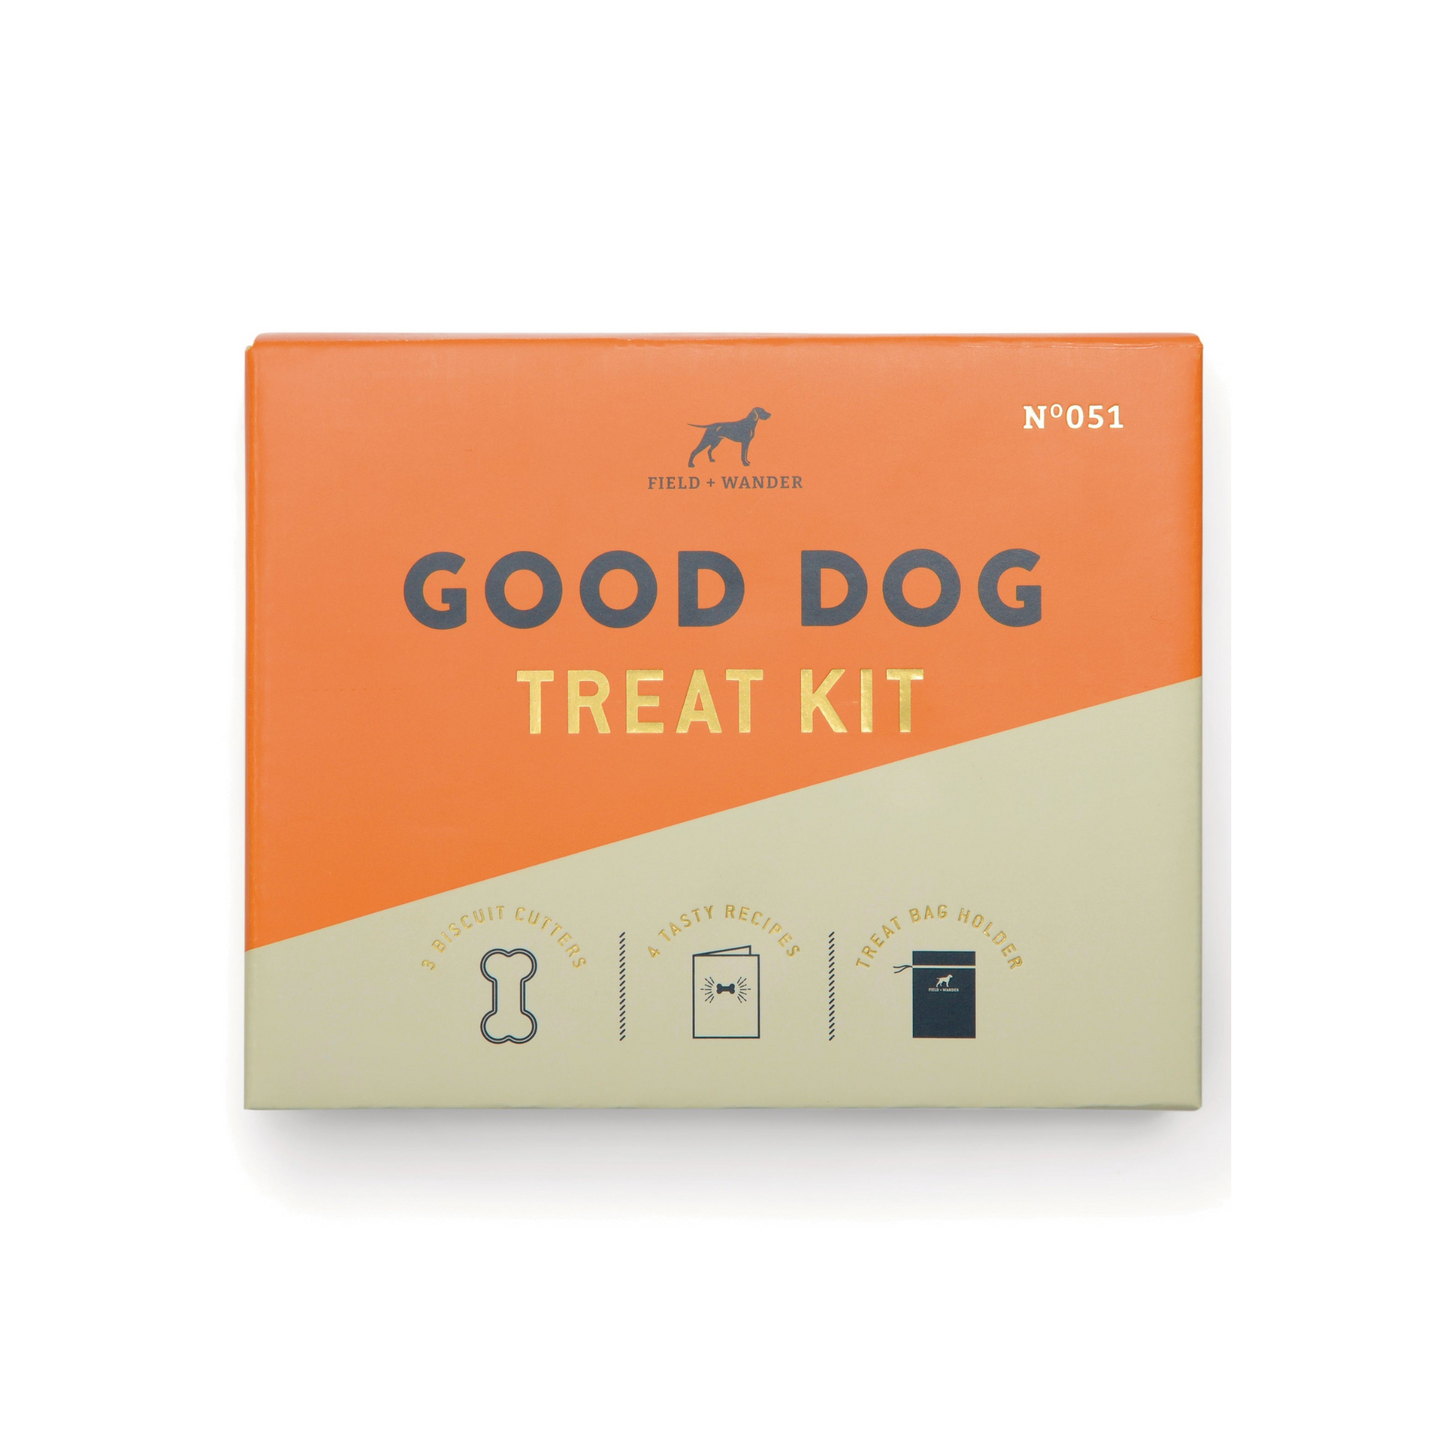 orange and cream box with "good dog treat kit" written on the front.